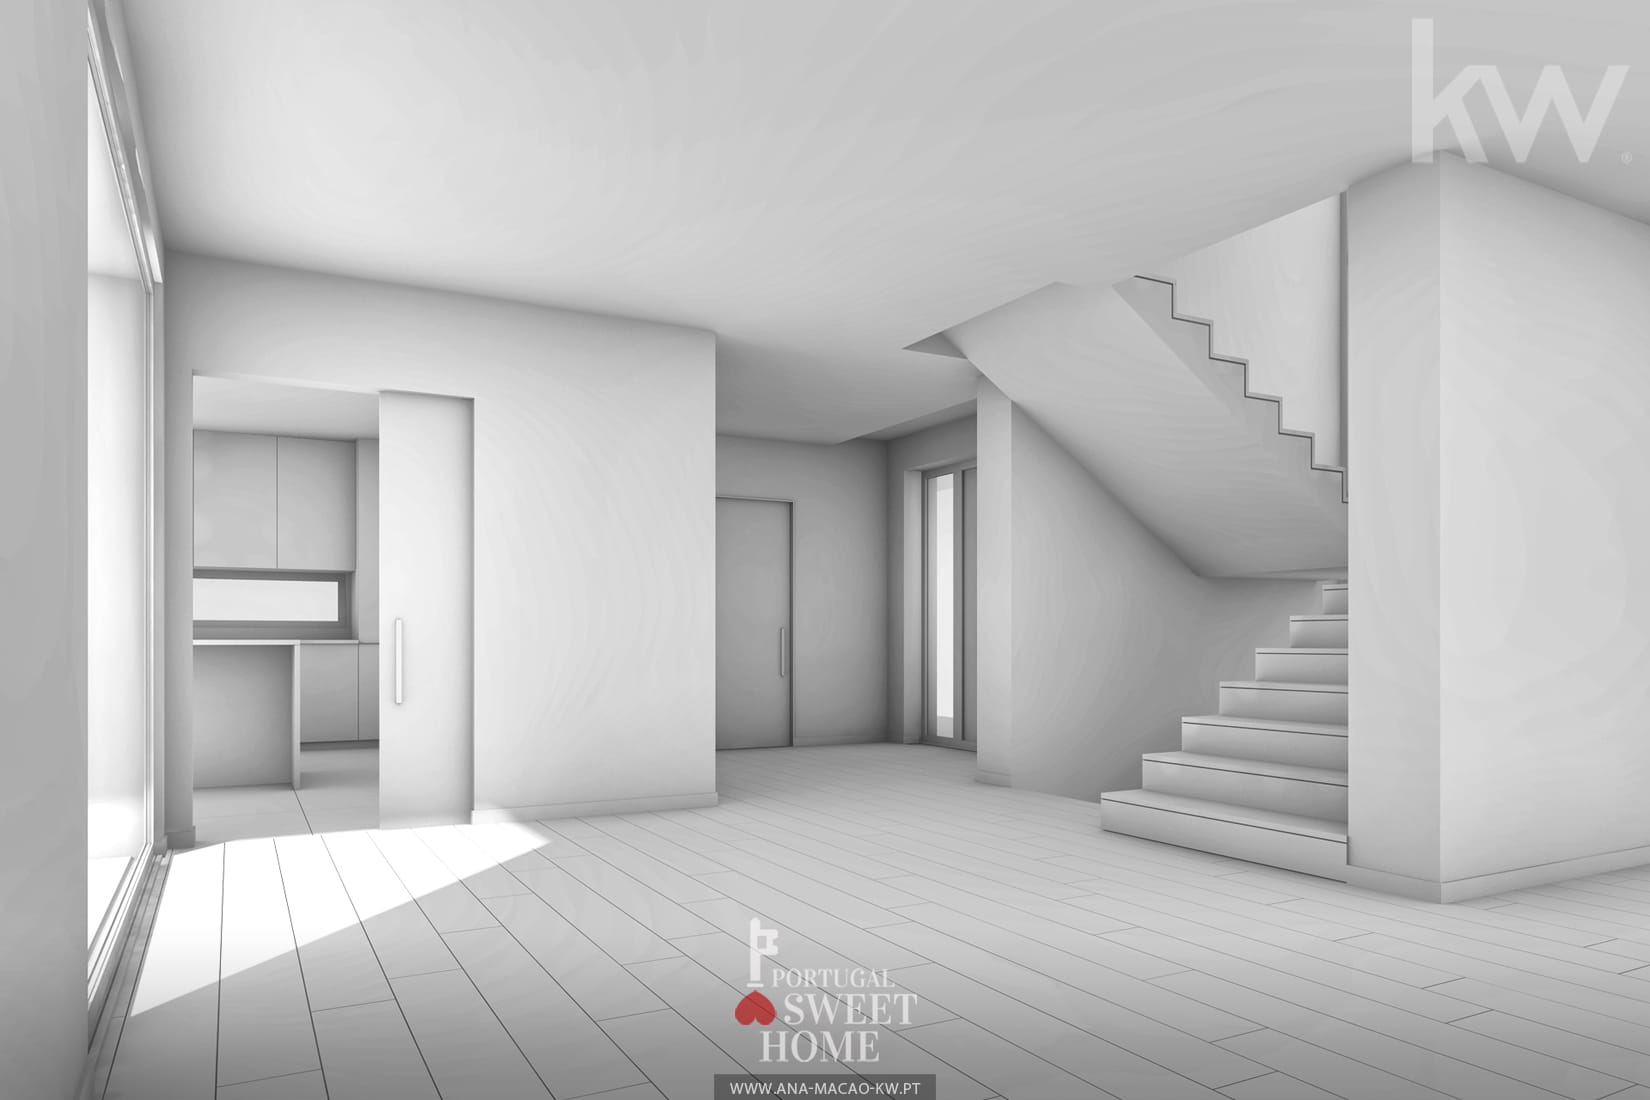 View of the Entrance Hall (Project)